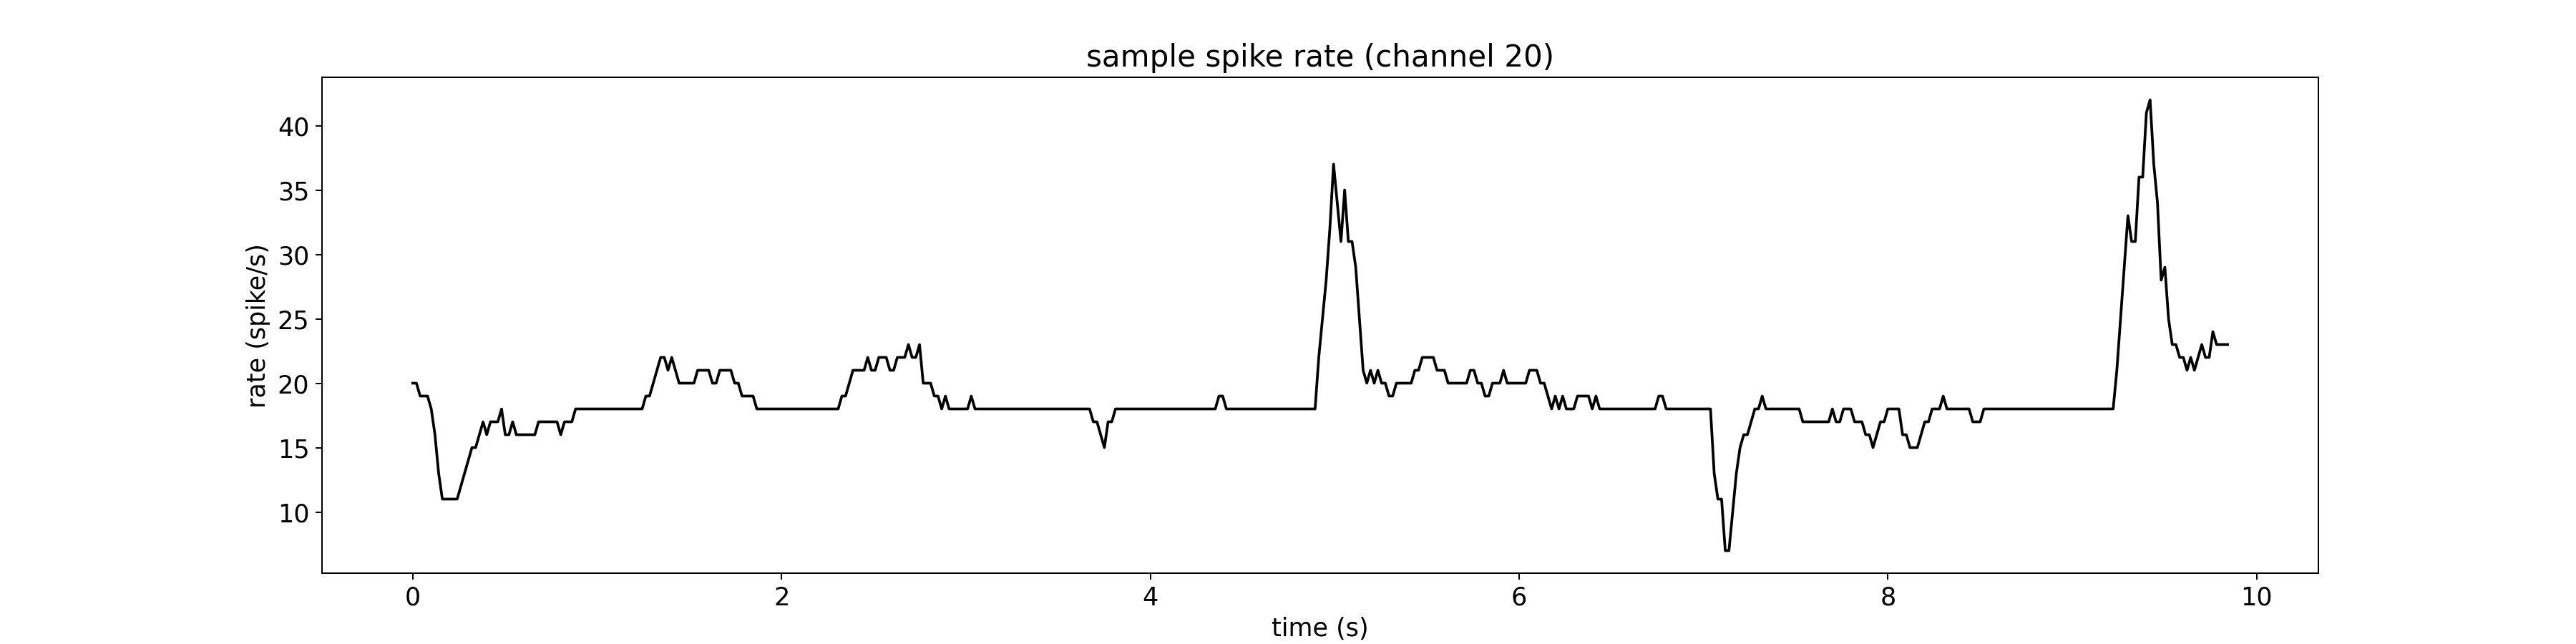 sample spike rate (channel 20)